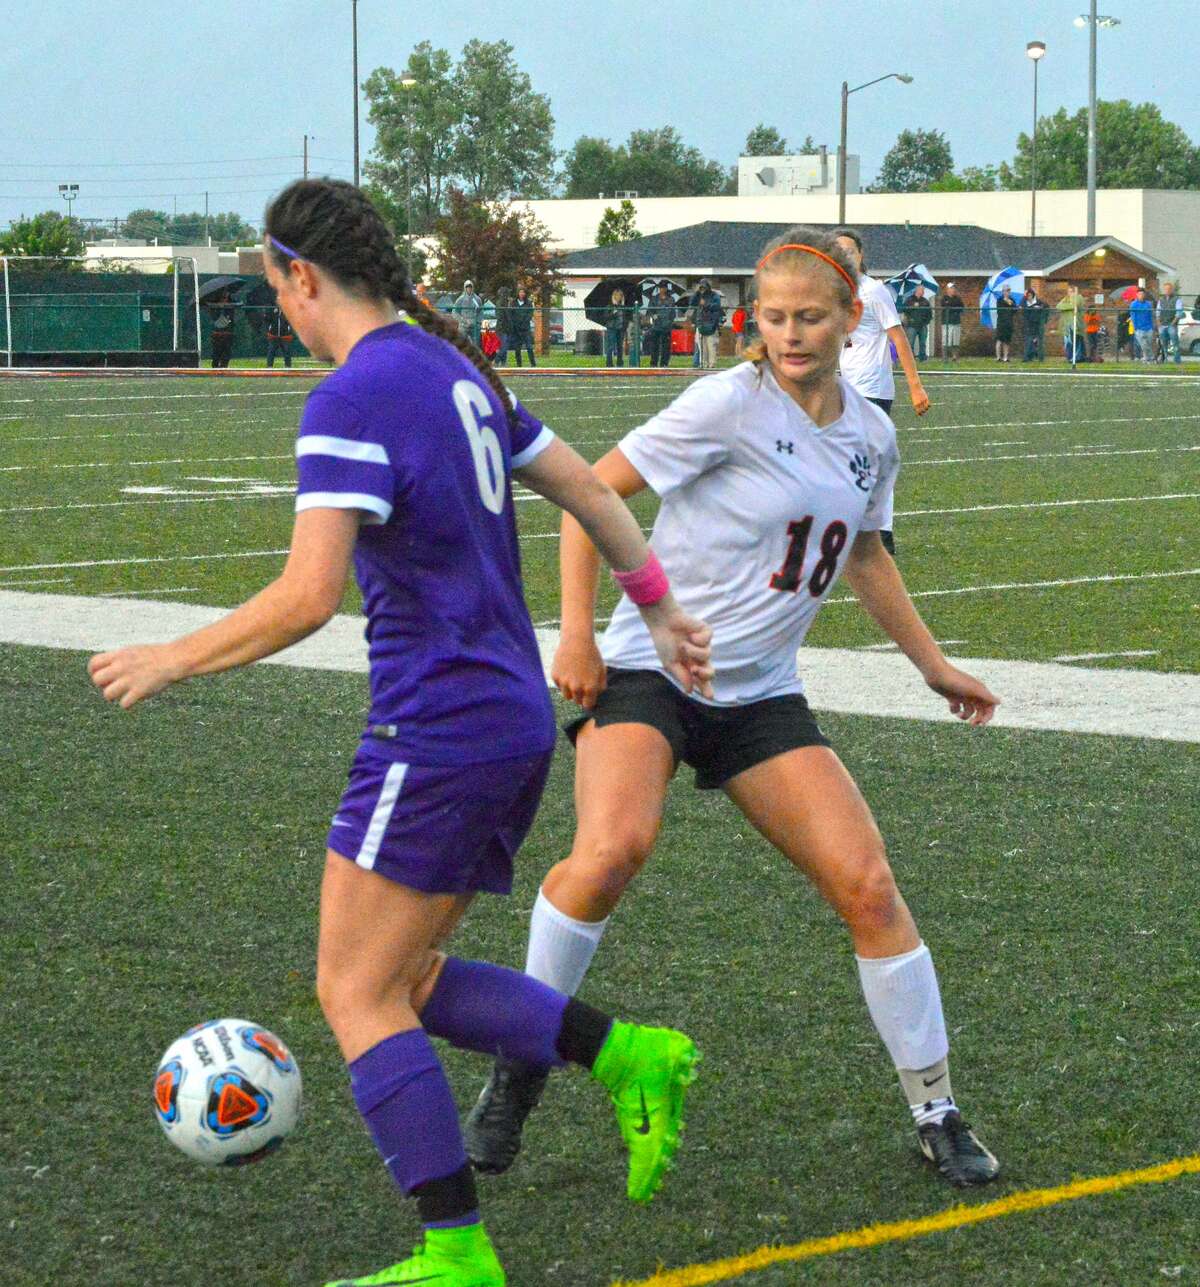 Edwardsville senior forward Abby Crabtree, right, tries to win a loose ball near midfield in the first half.